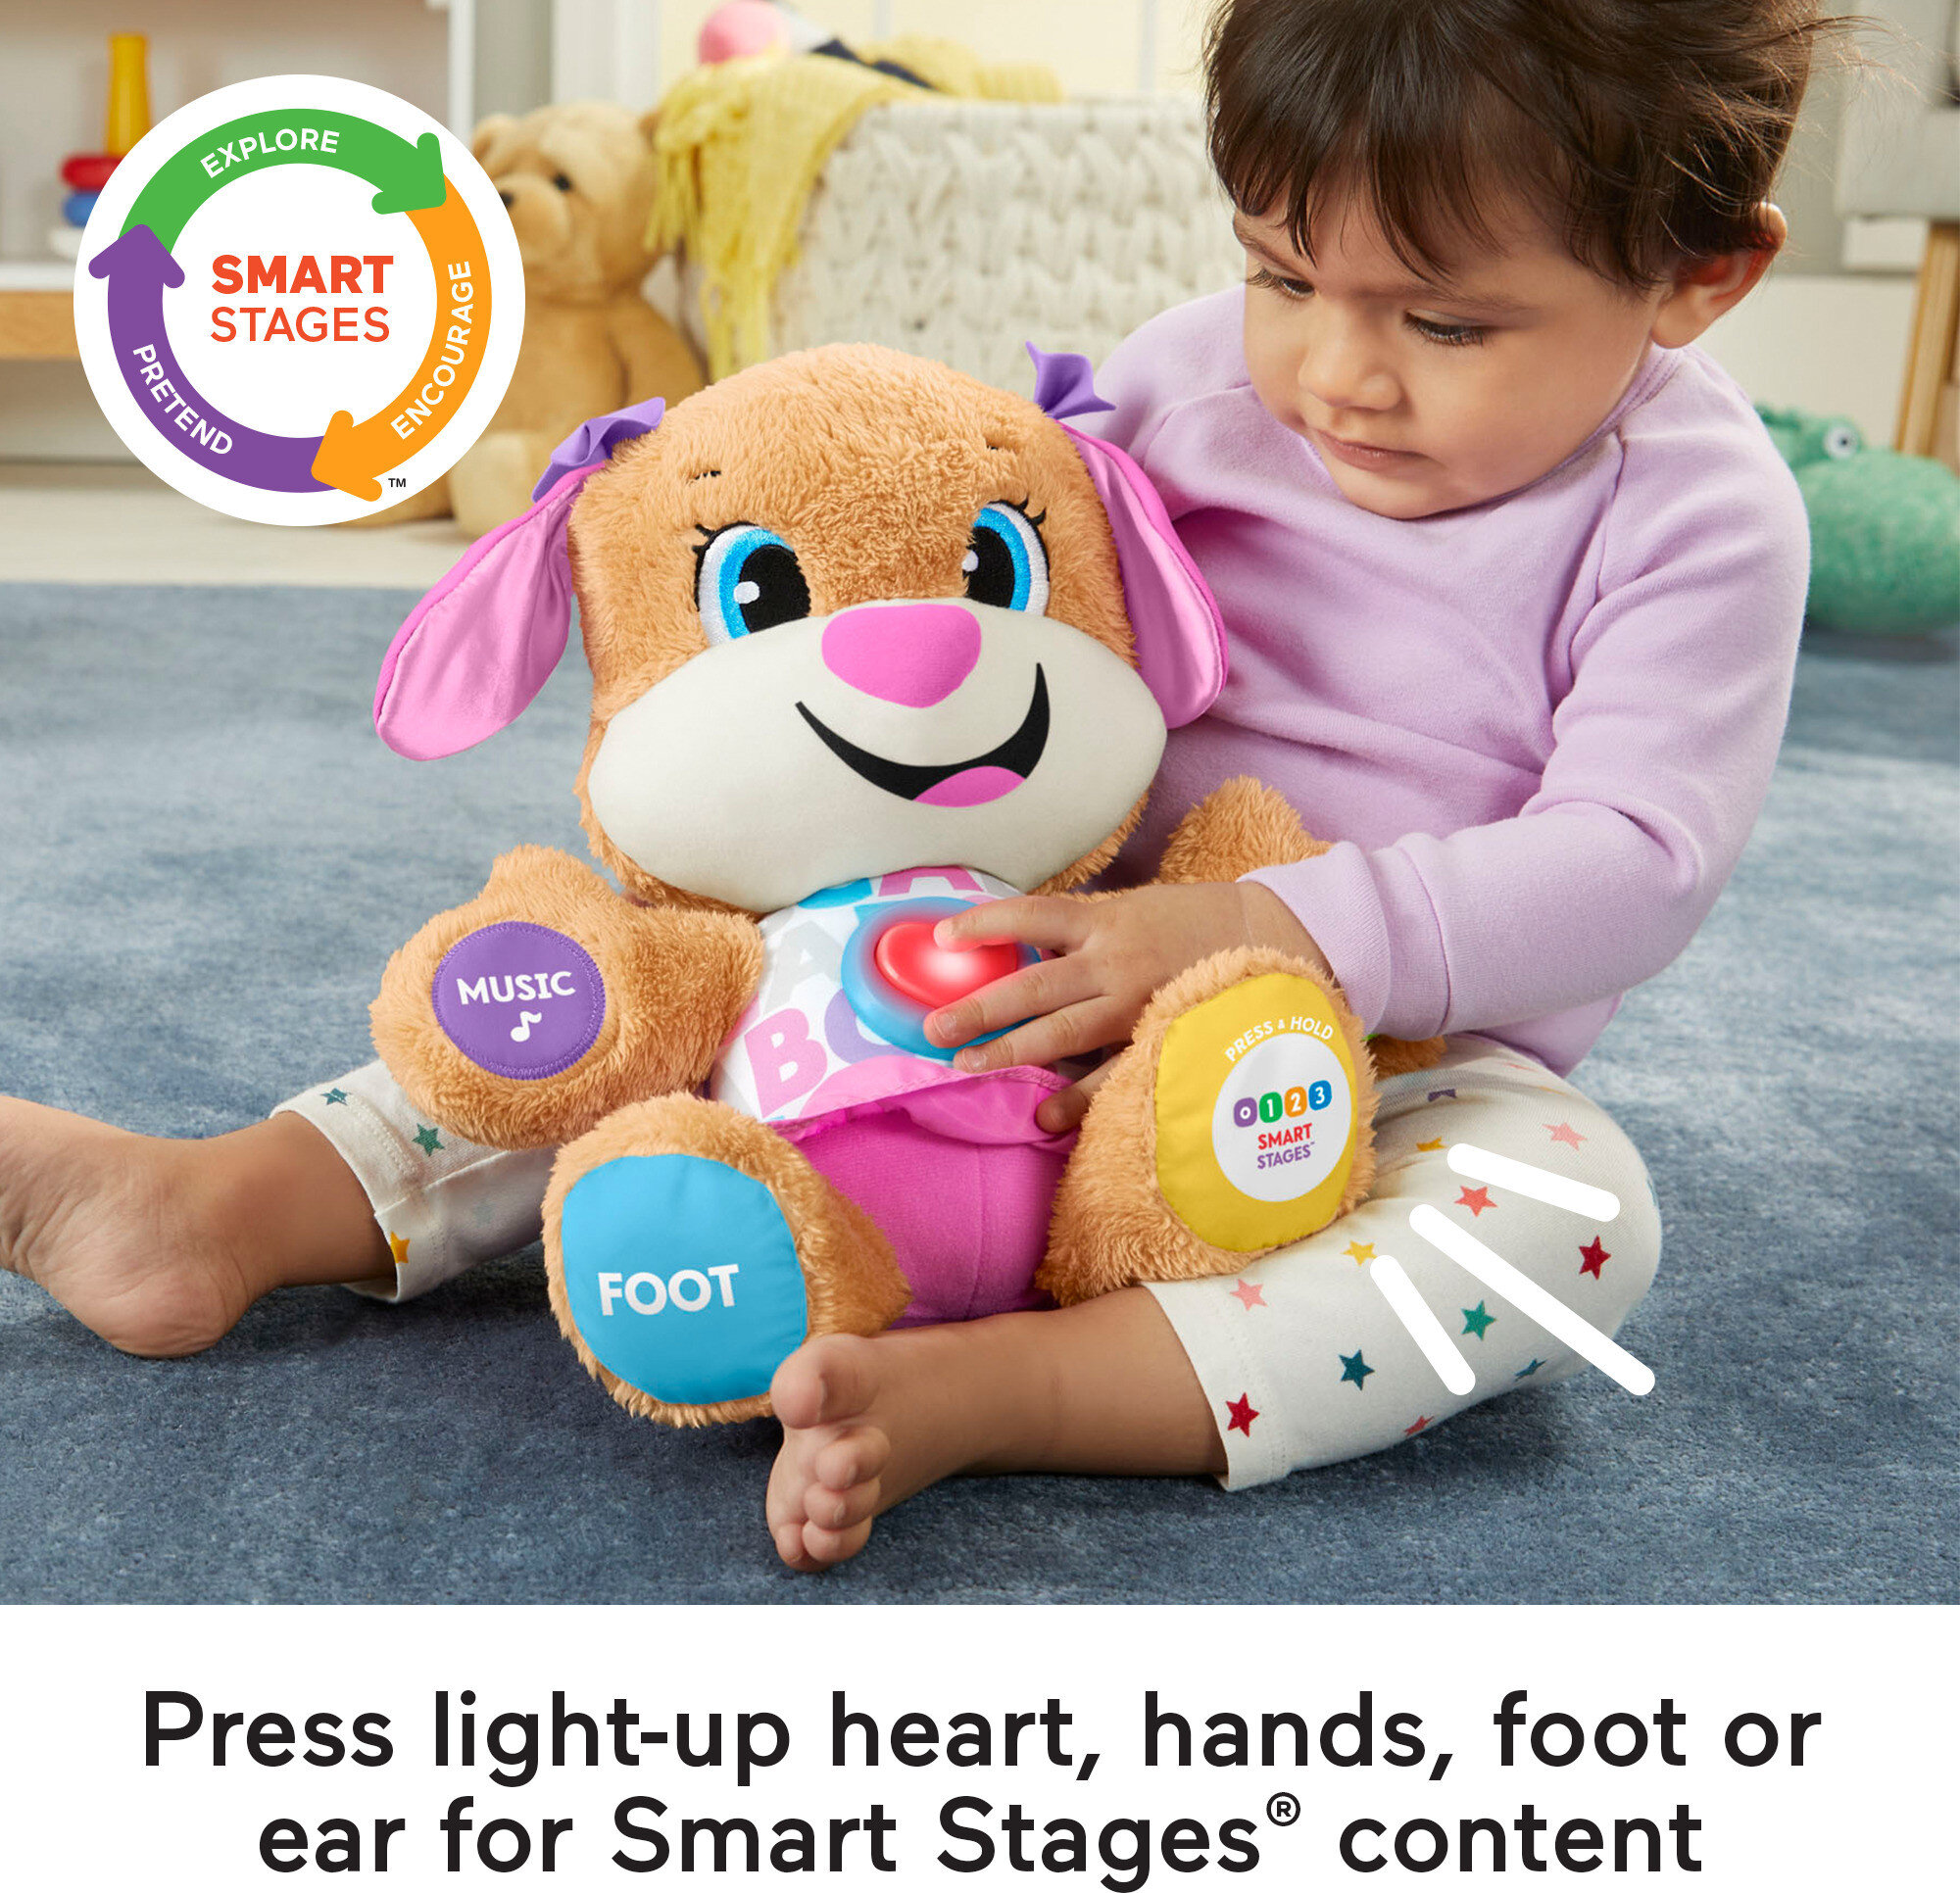 Fisher-Price Laugh & Learn Smart Stages Sis Puppy Plush Learning Toy for Baby, Infants and Toddlers, 6 months and up - image 4 of 8